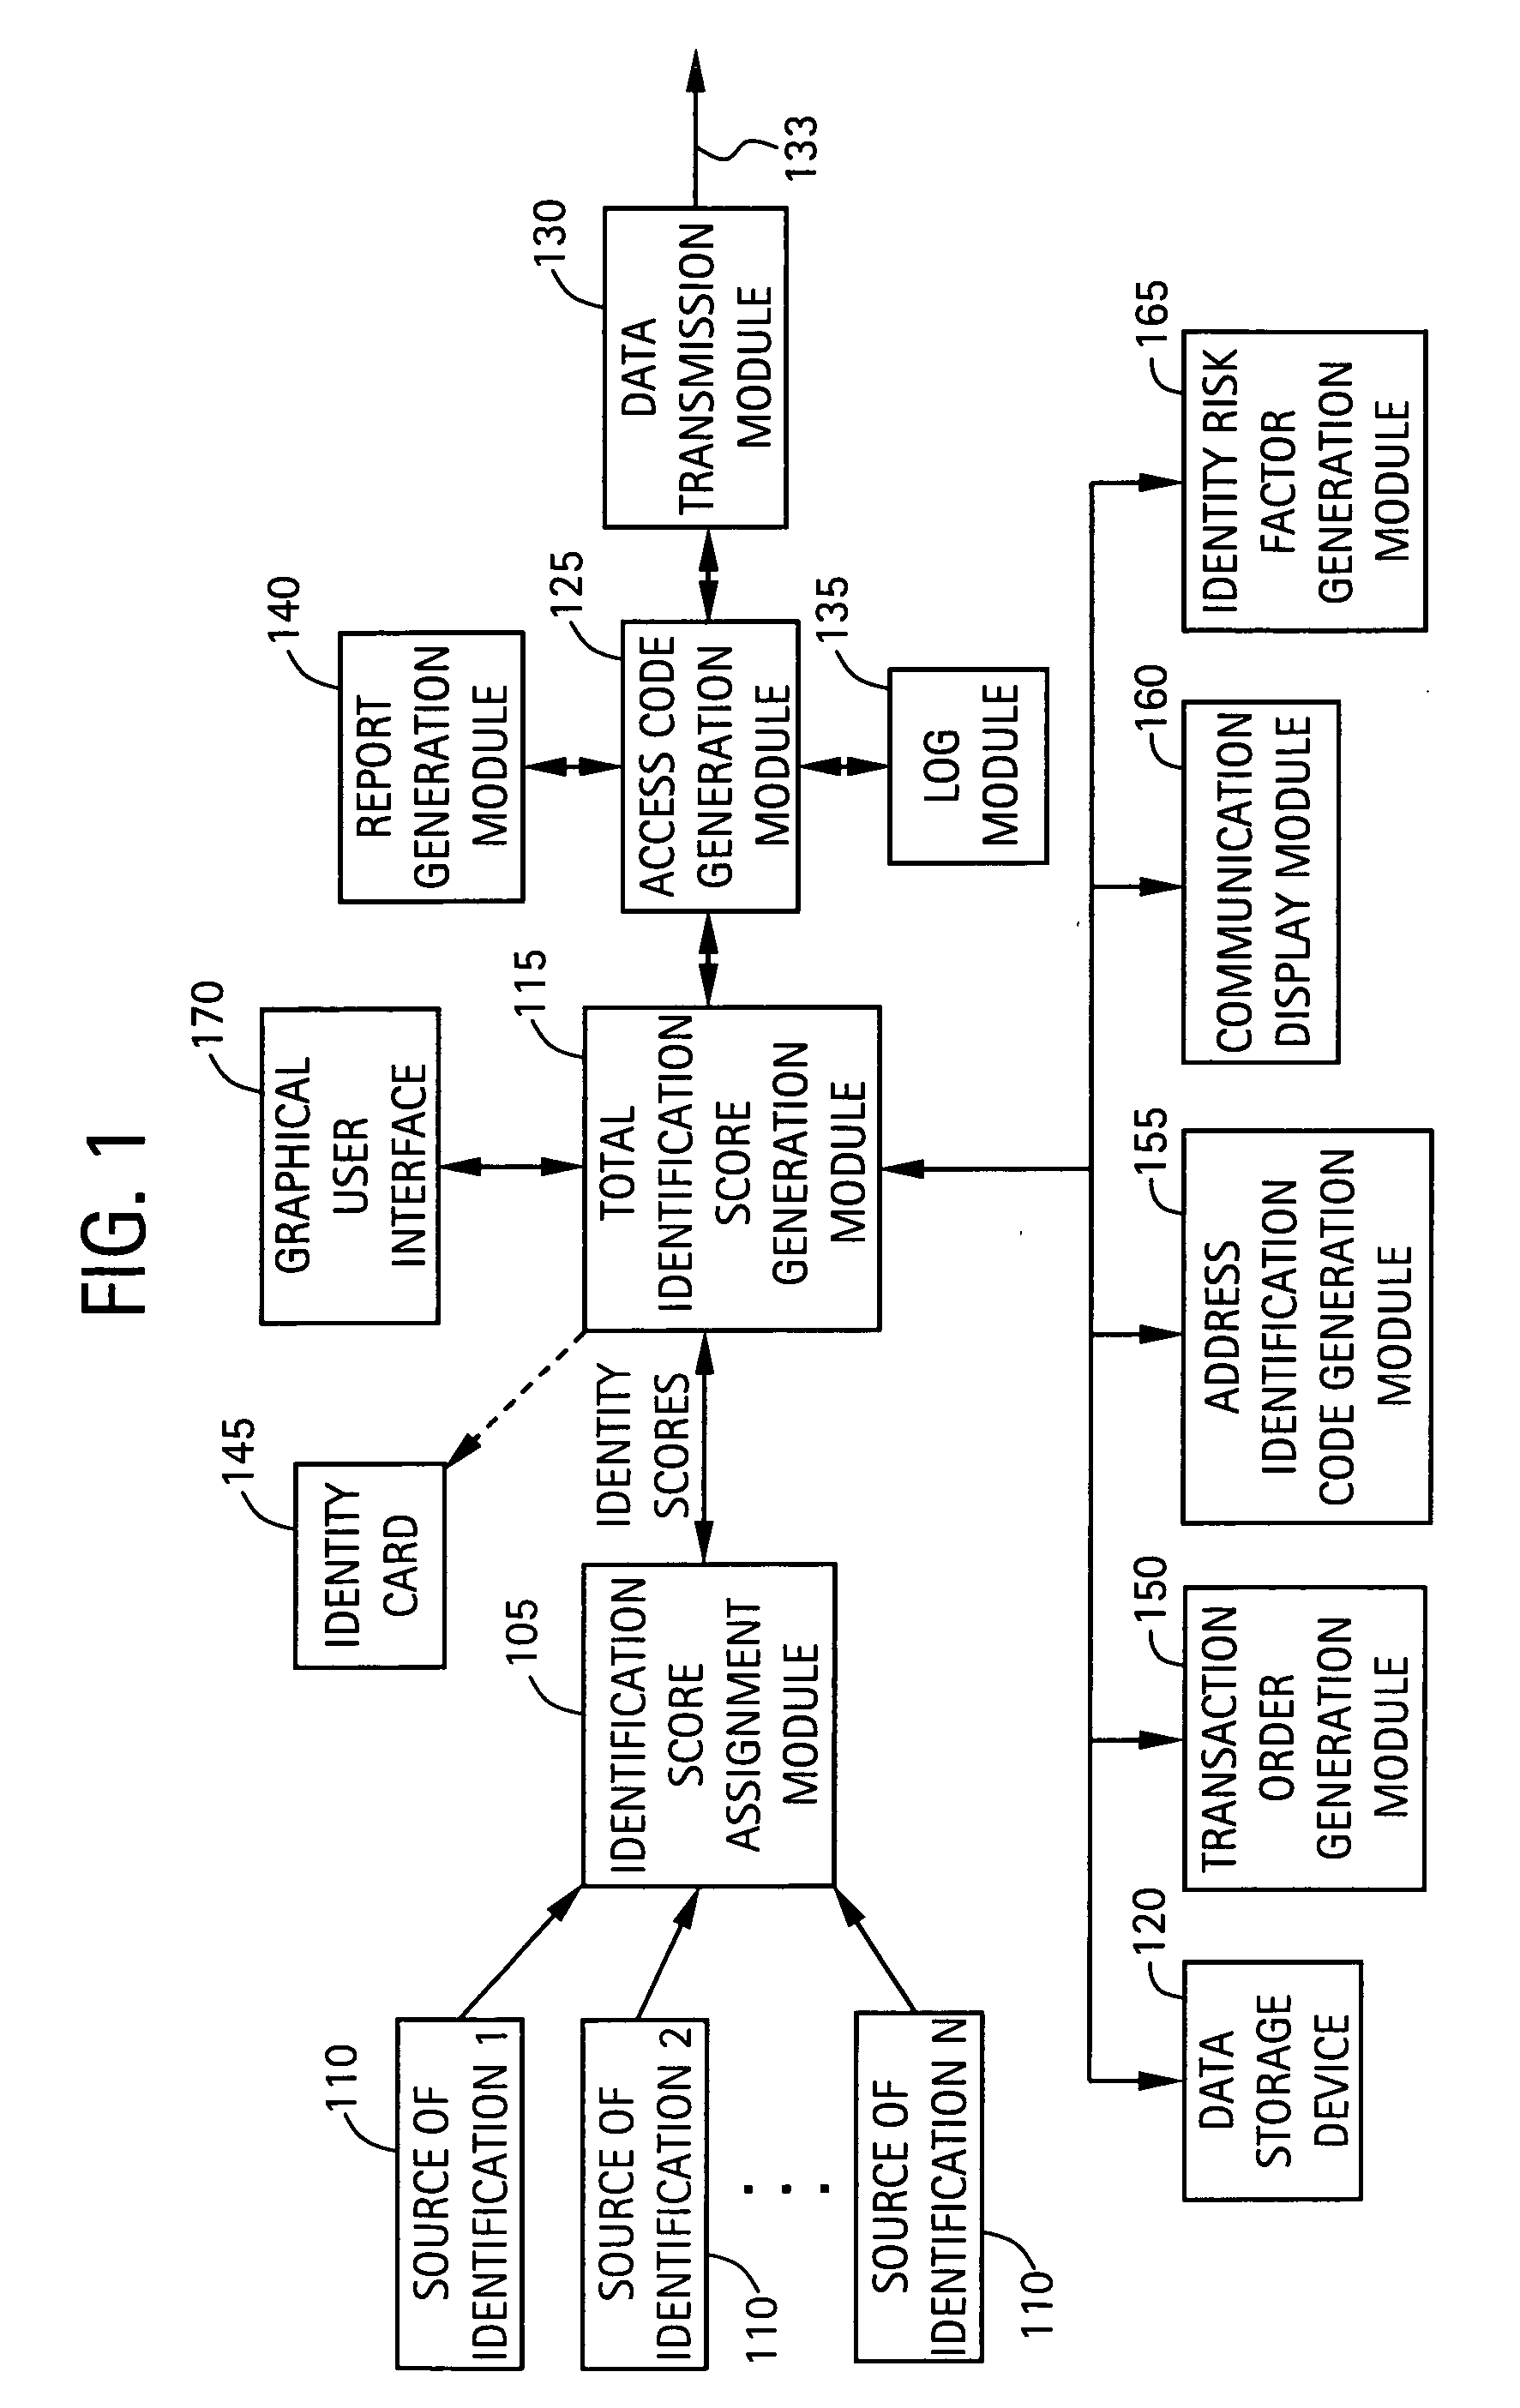 System and method for identity verification and management